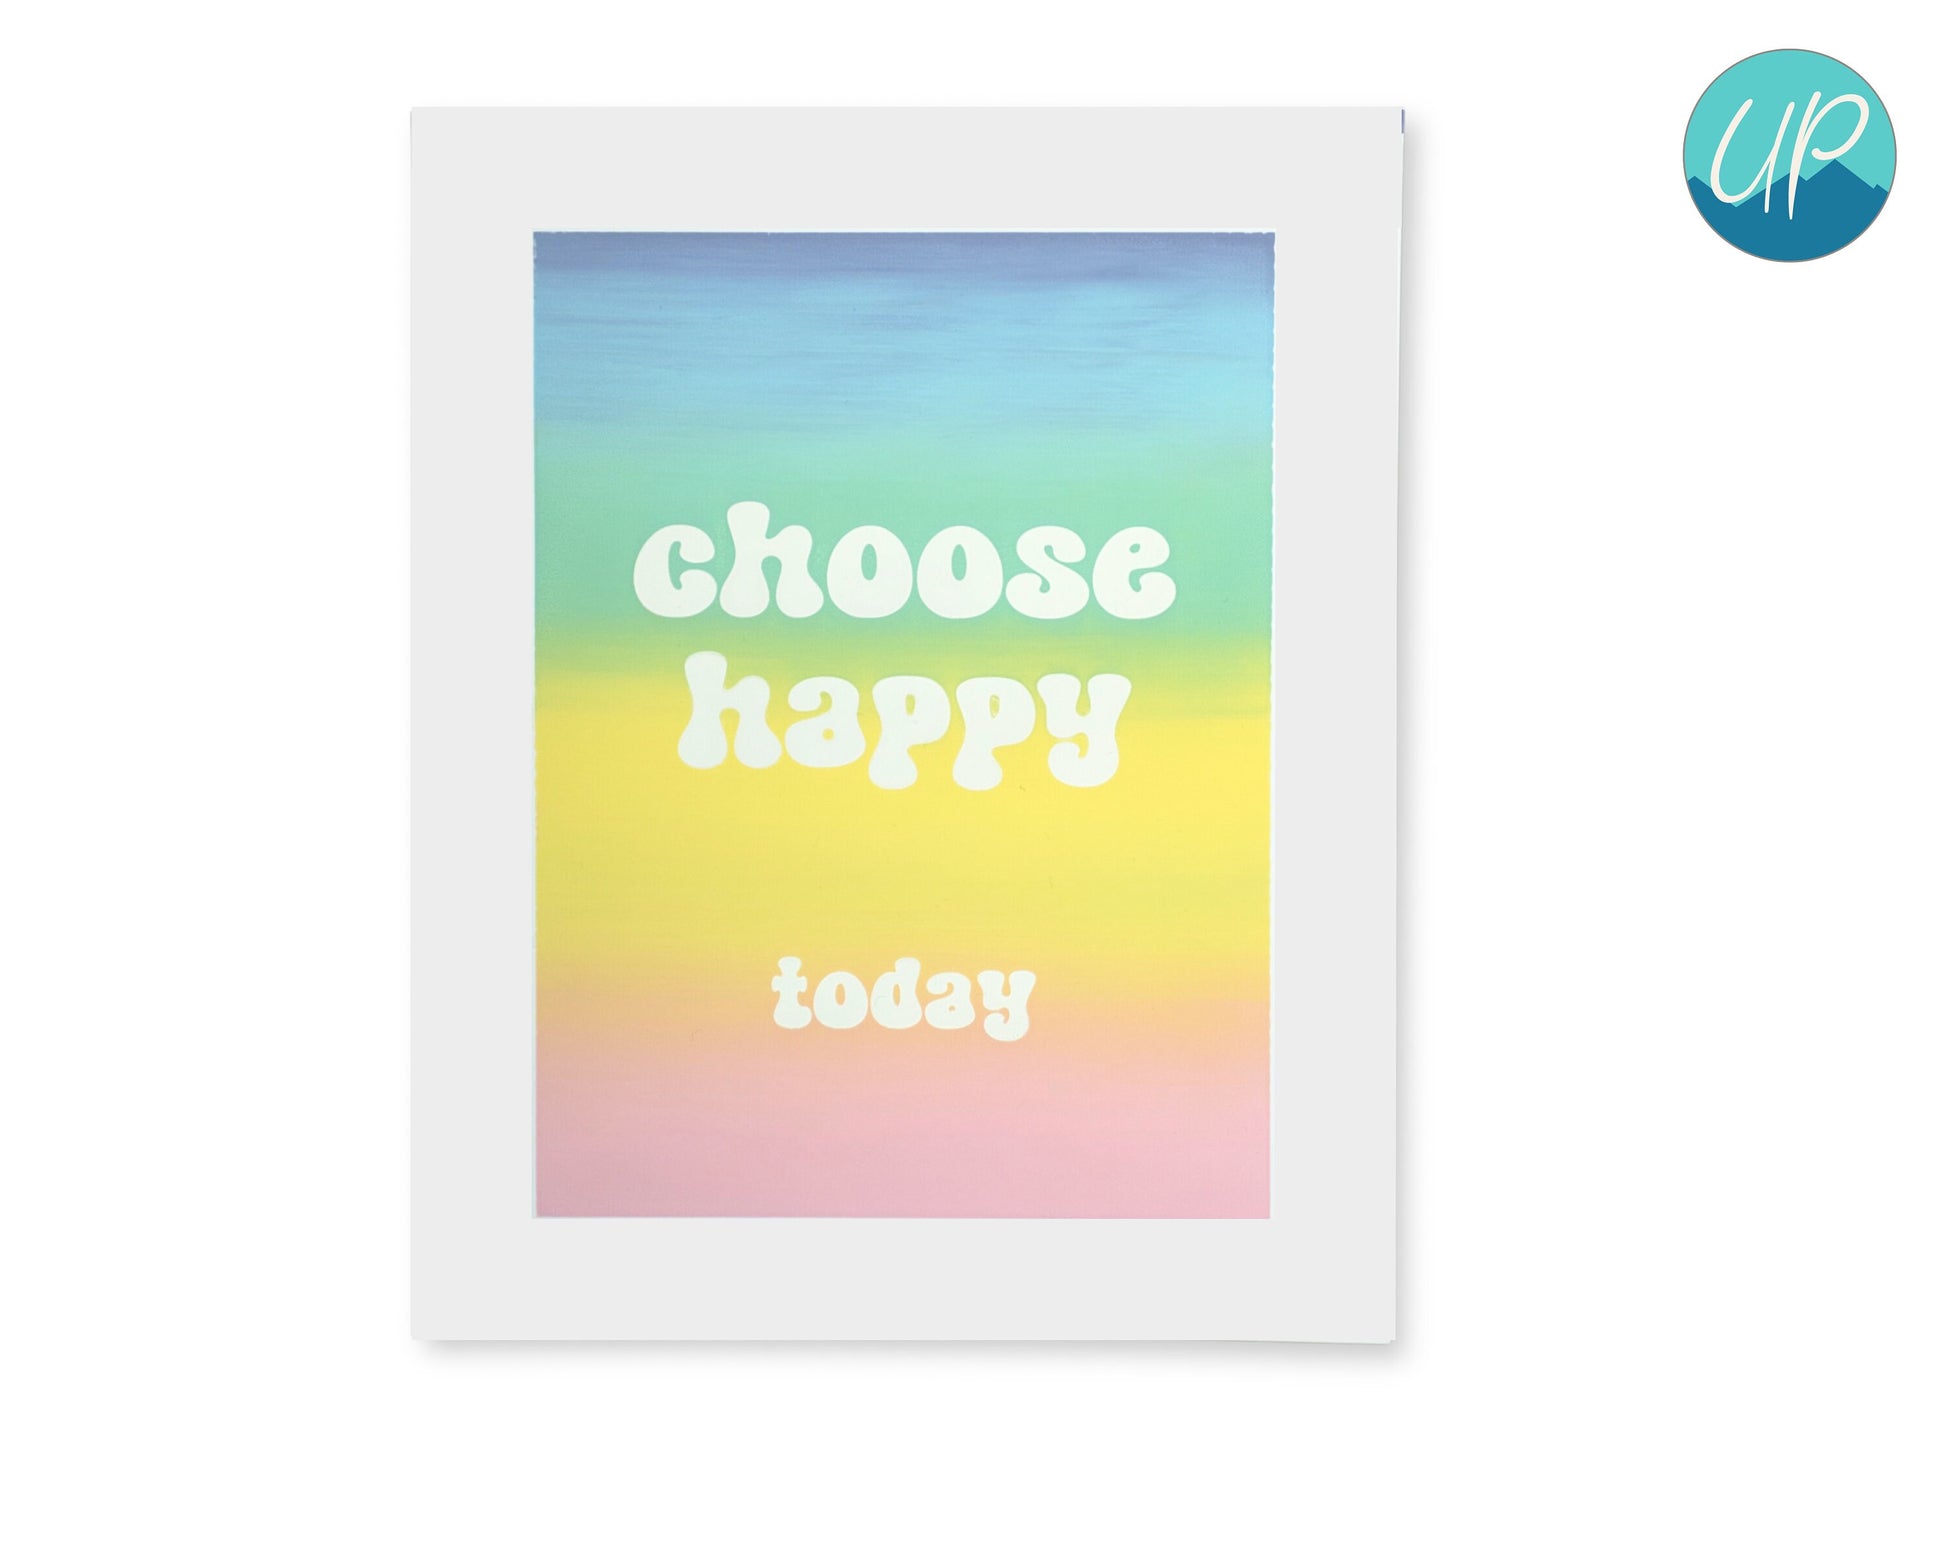 Choose Happy Today Limited Edition Screen Print, Blended Rainbow Wall Art, Self Care Inspirational Quotes, 8 x 10 inches, Best Friend Gifts